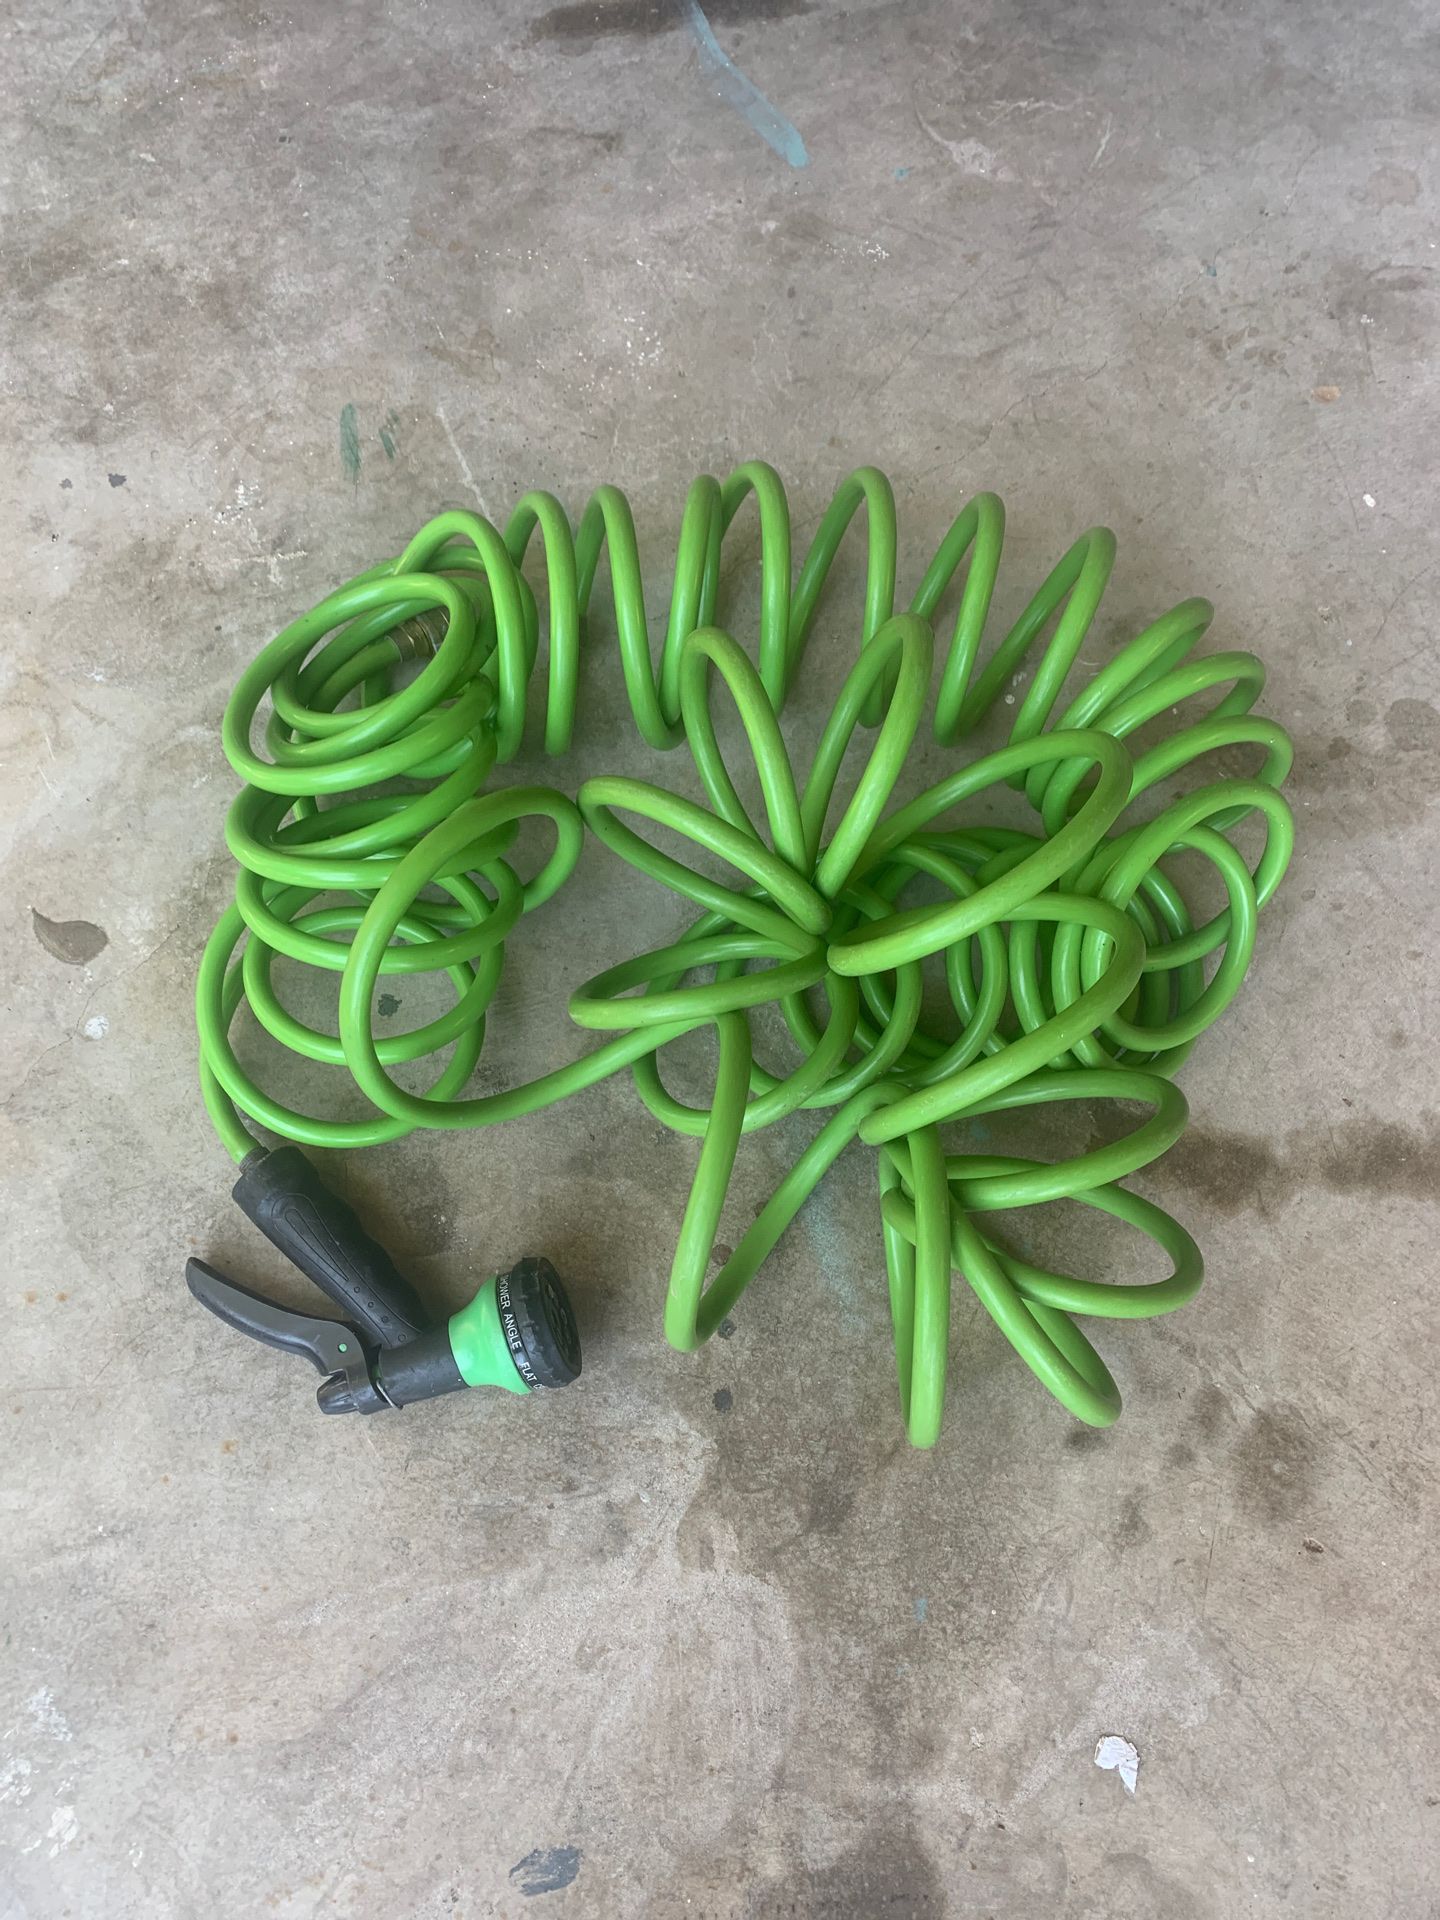 Great condition used water hose